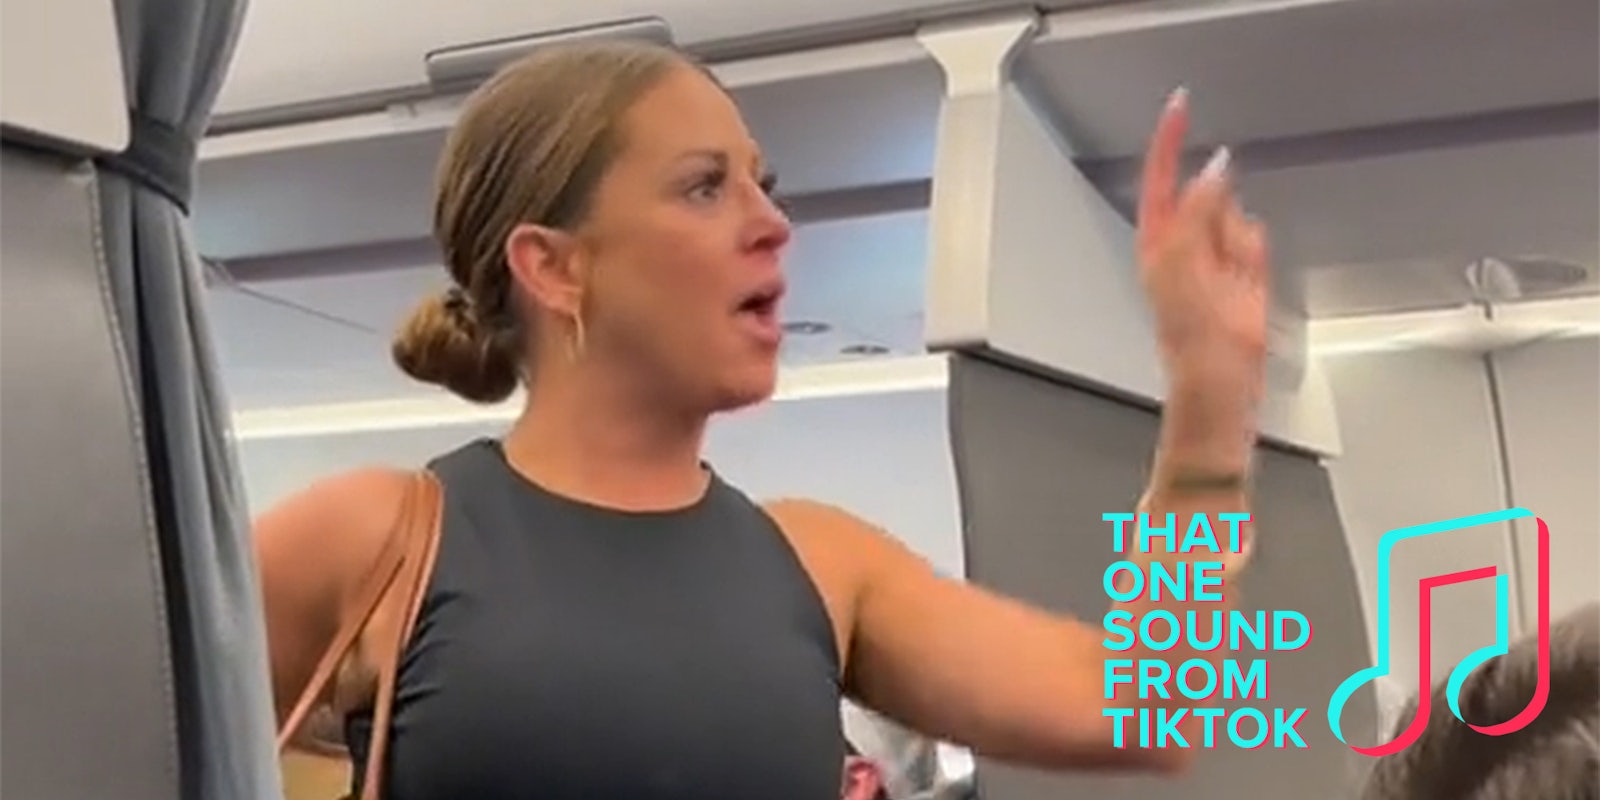 woman on airplane pointing with 'that one sound from tiktok' logo